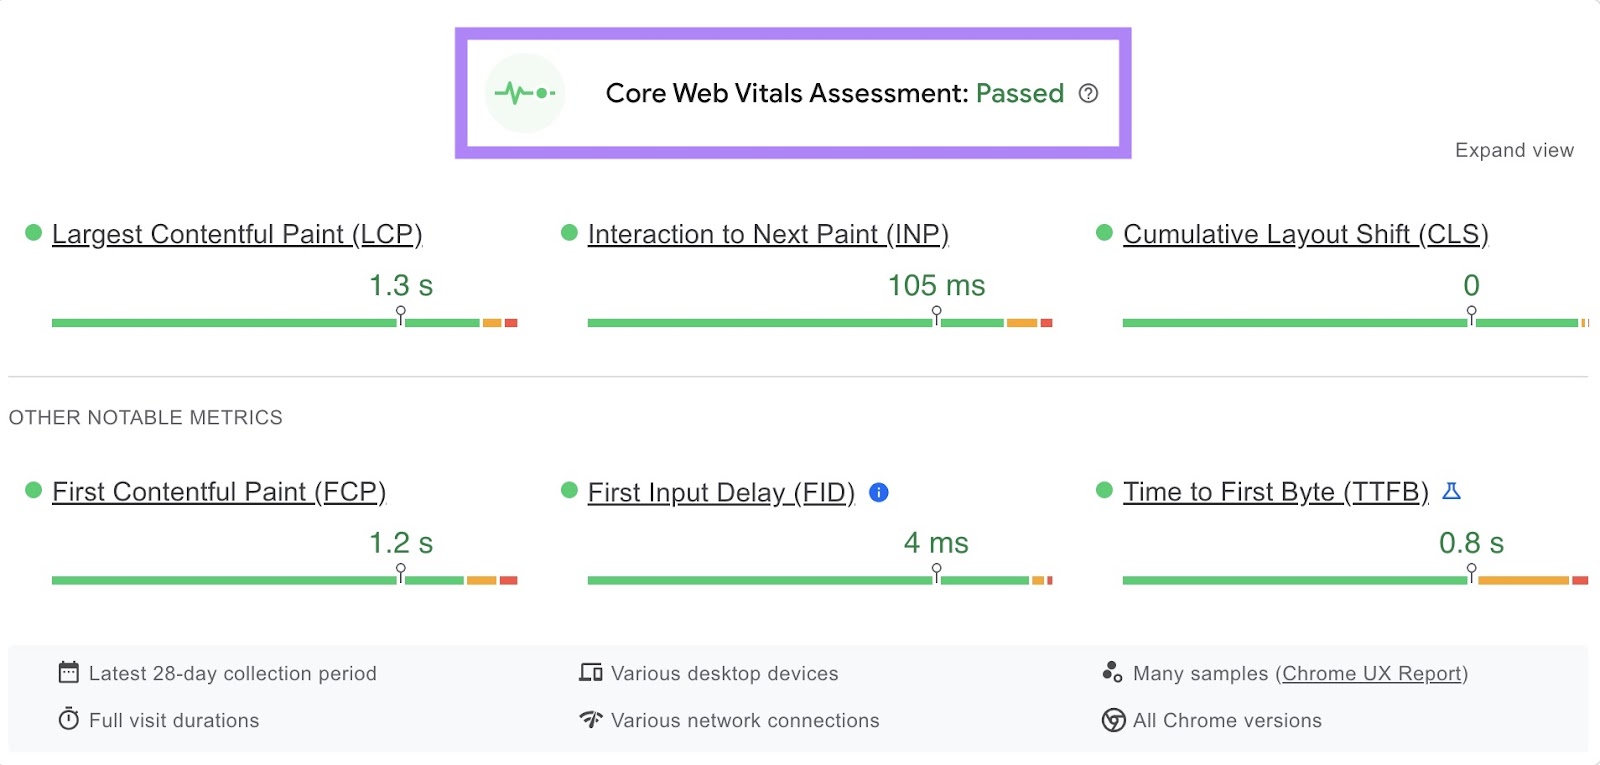 Core Web Vitals Assessment passed on a PageSpeed Insights Report.